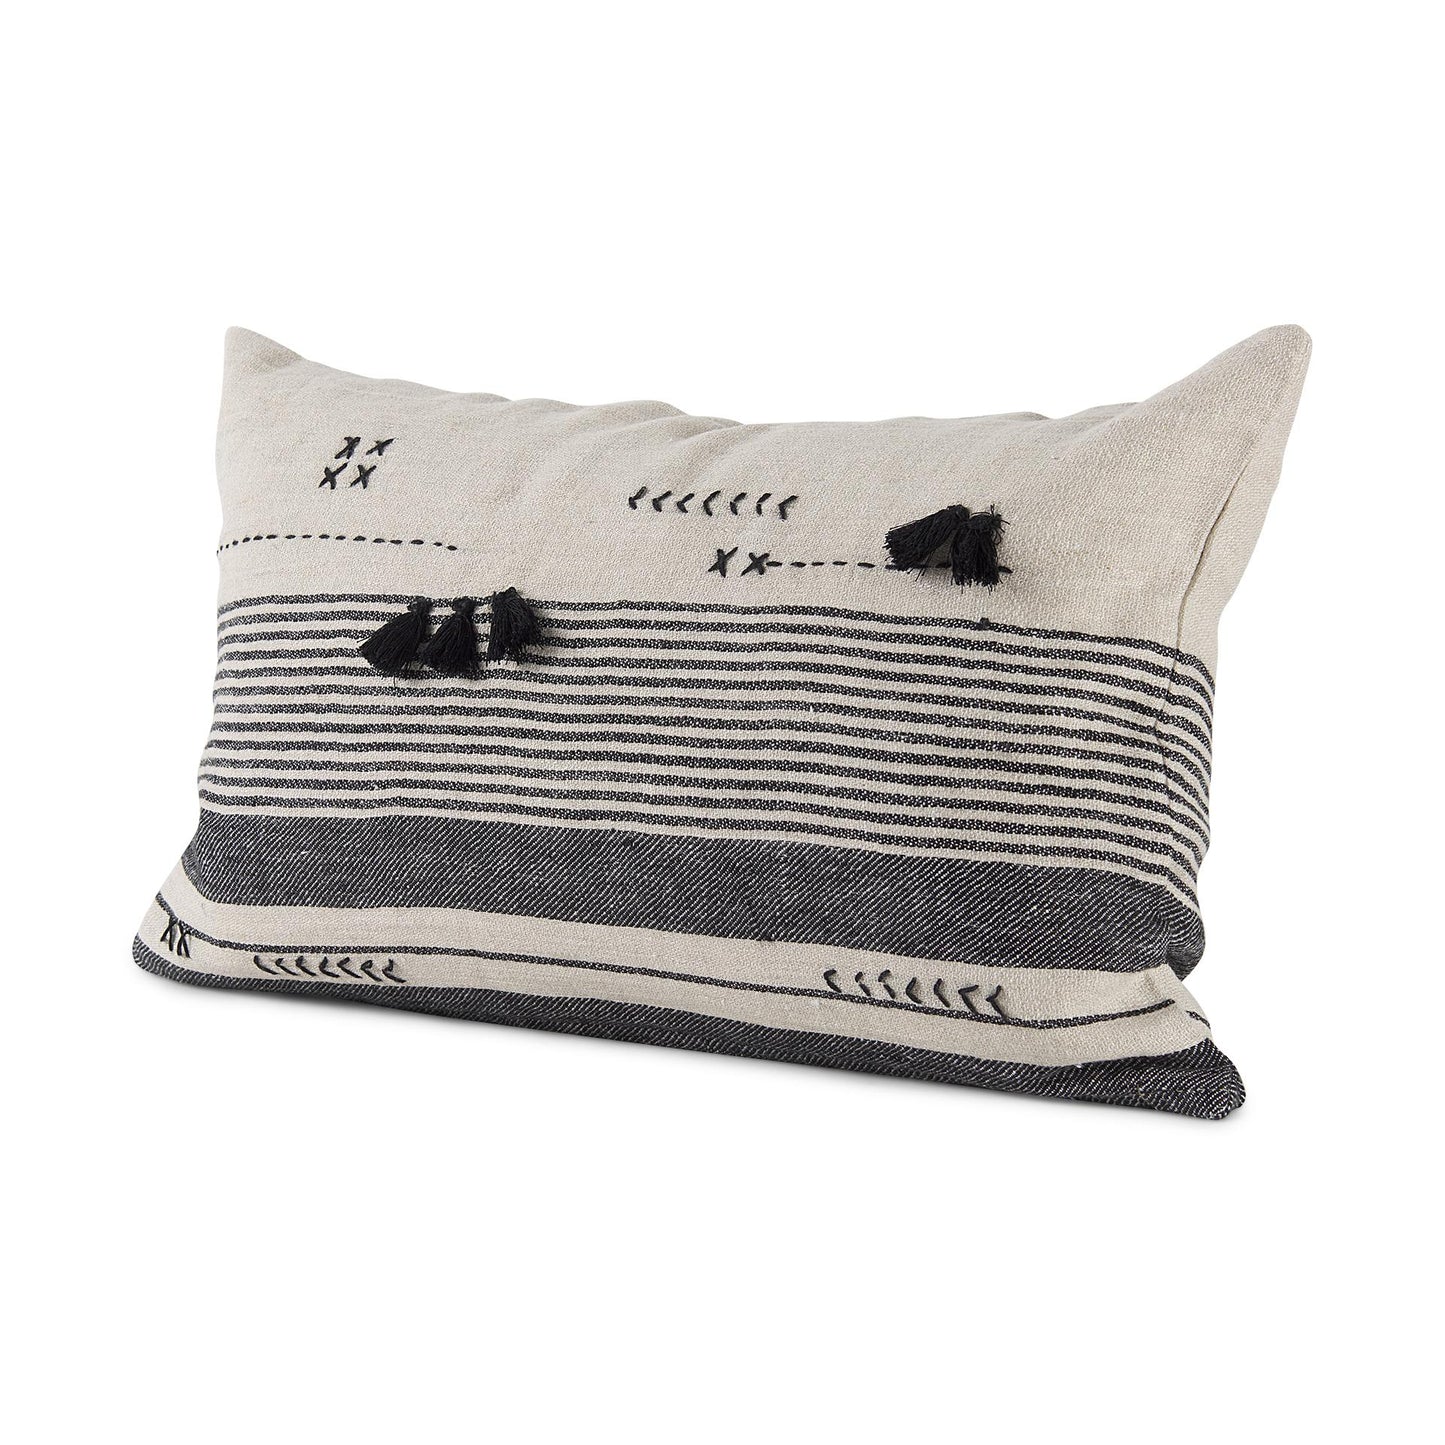 Thalia 13L x 21W Black and Beige Fabric Striped and Fringed Decorative Pillow Cover